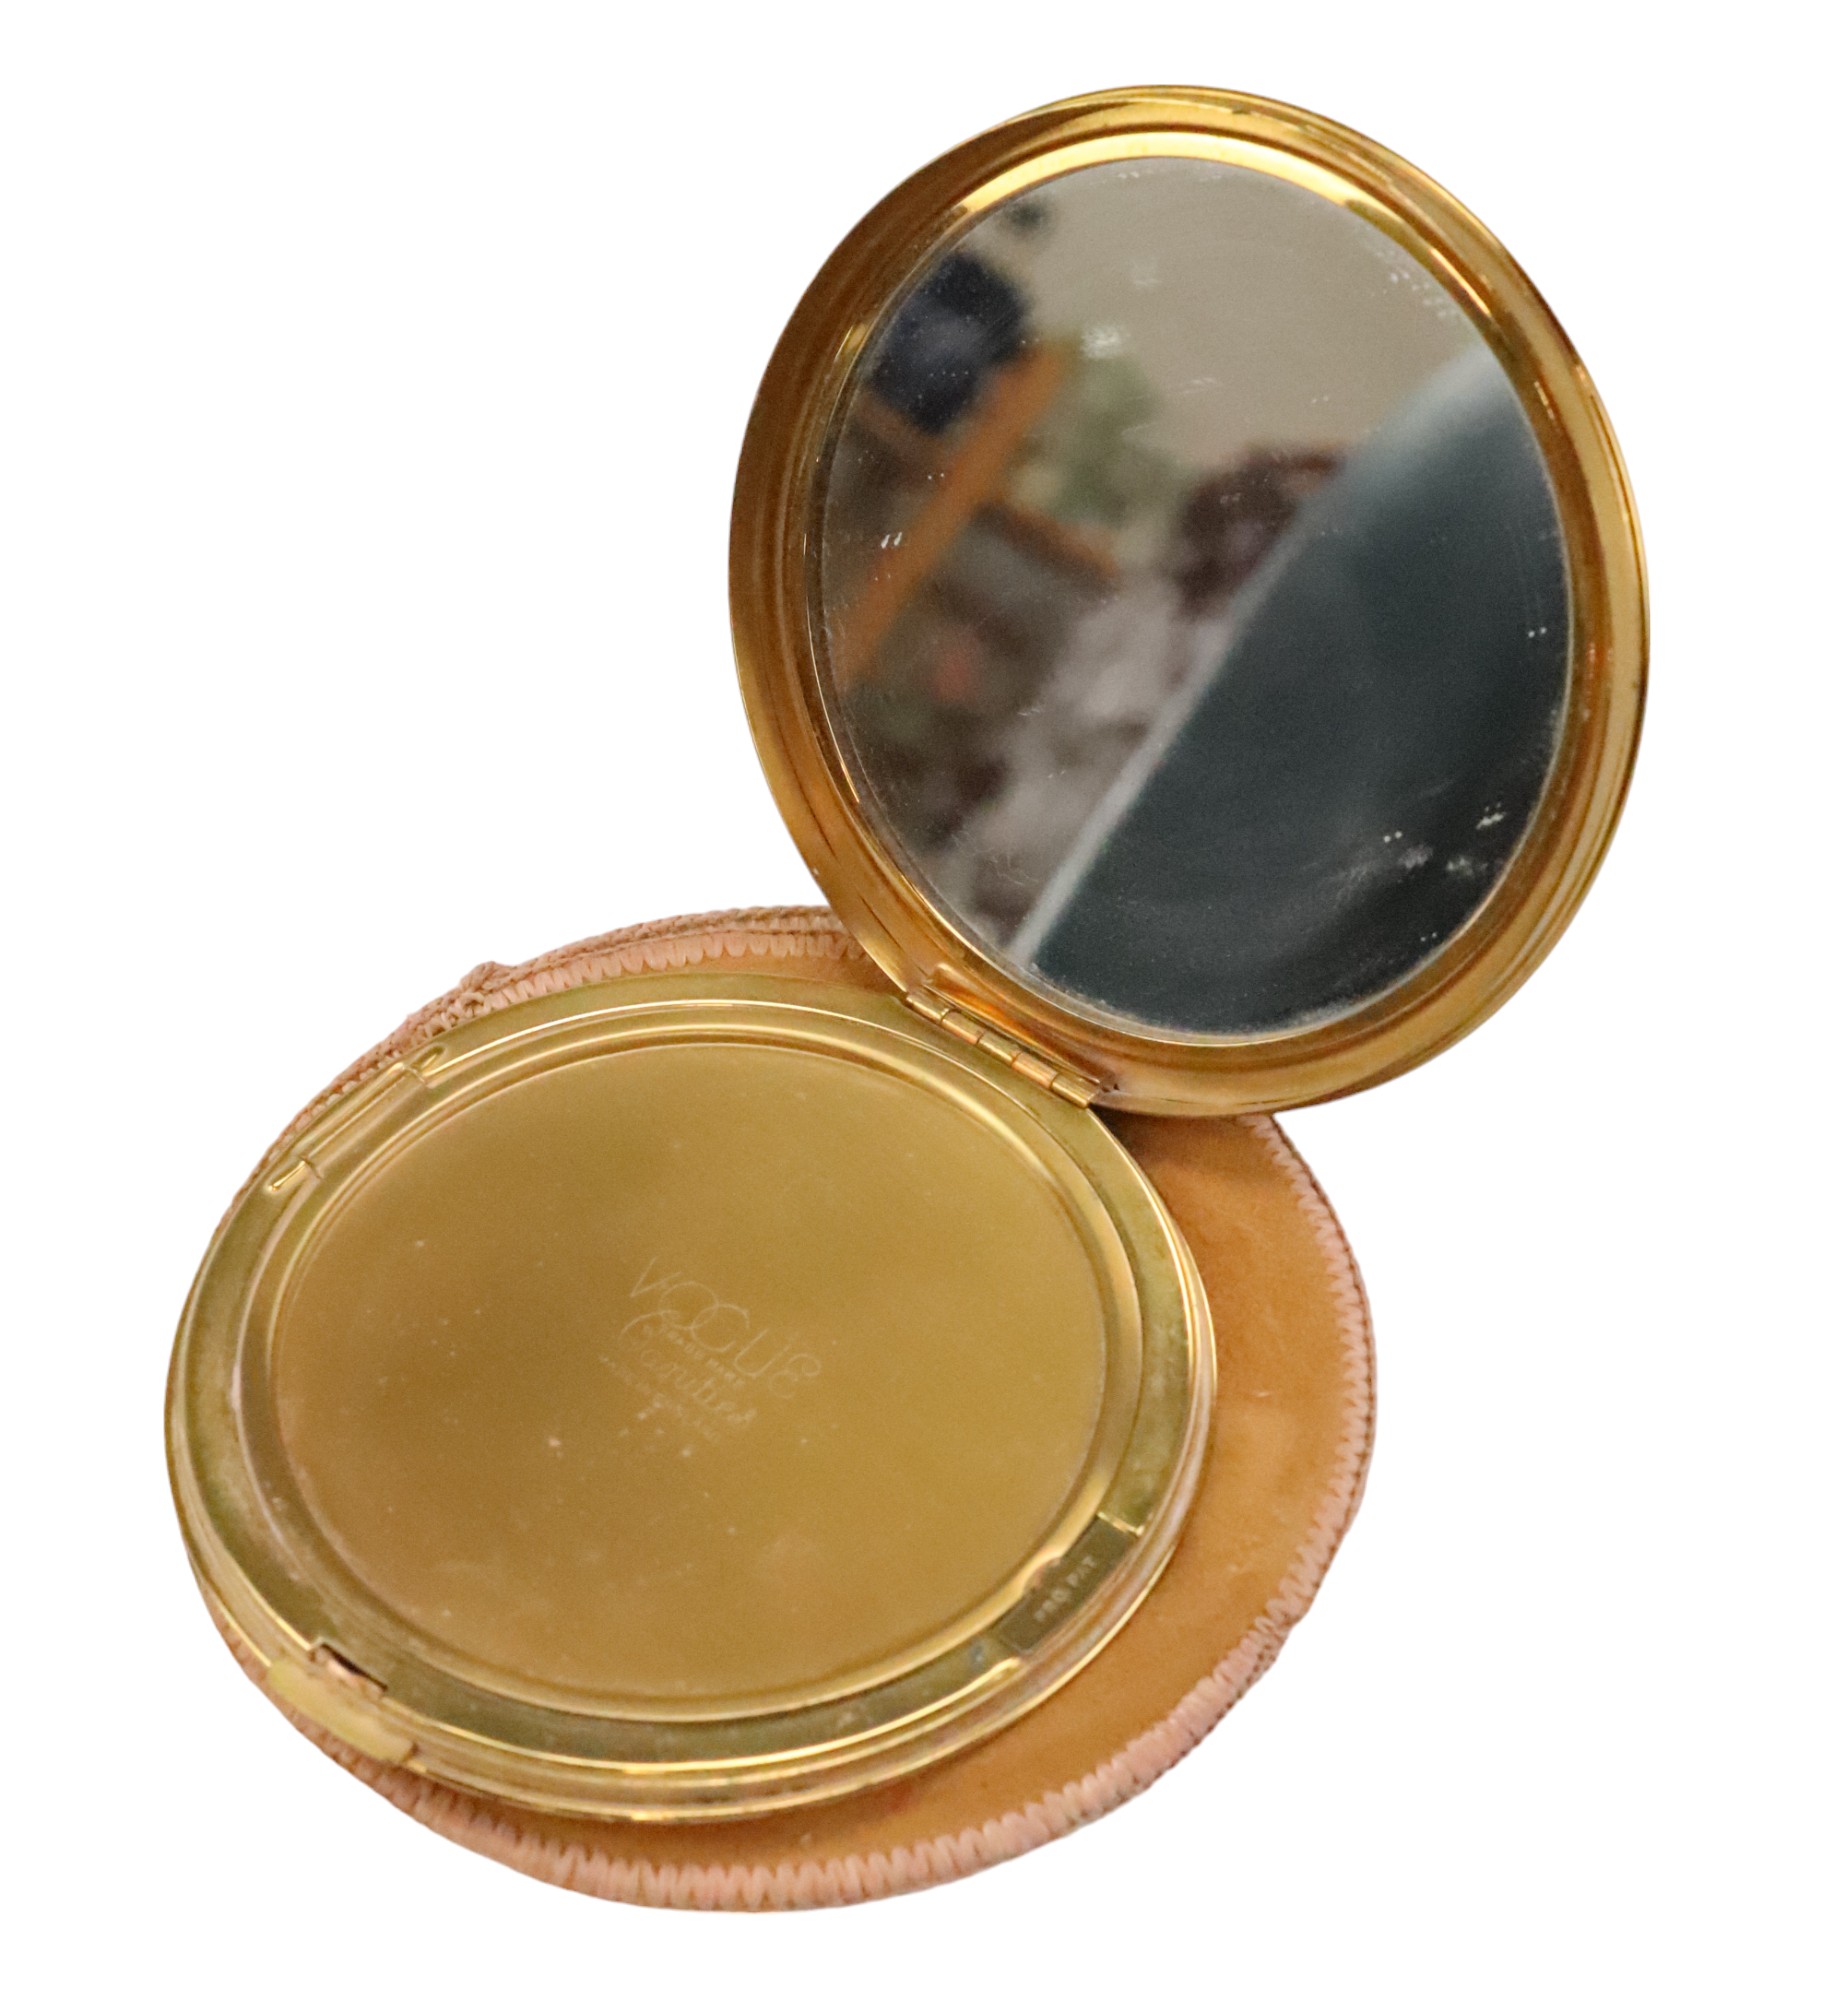 A mid 20th Century Vogue Vanities powder compact